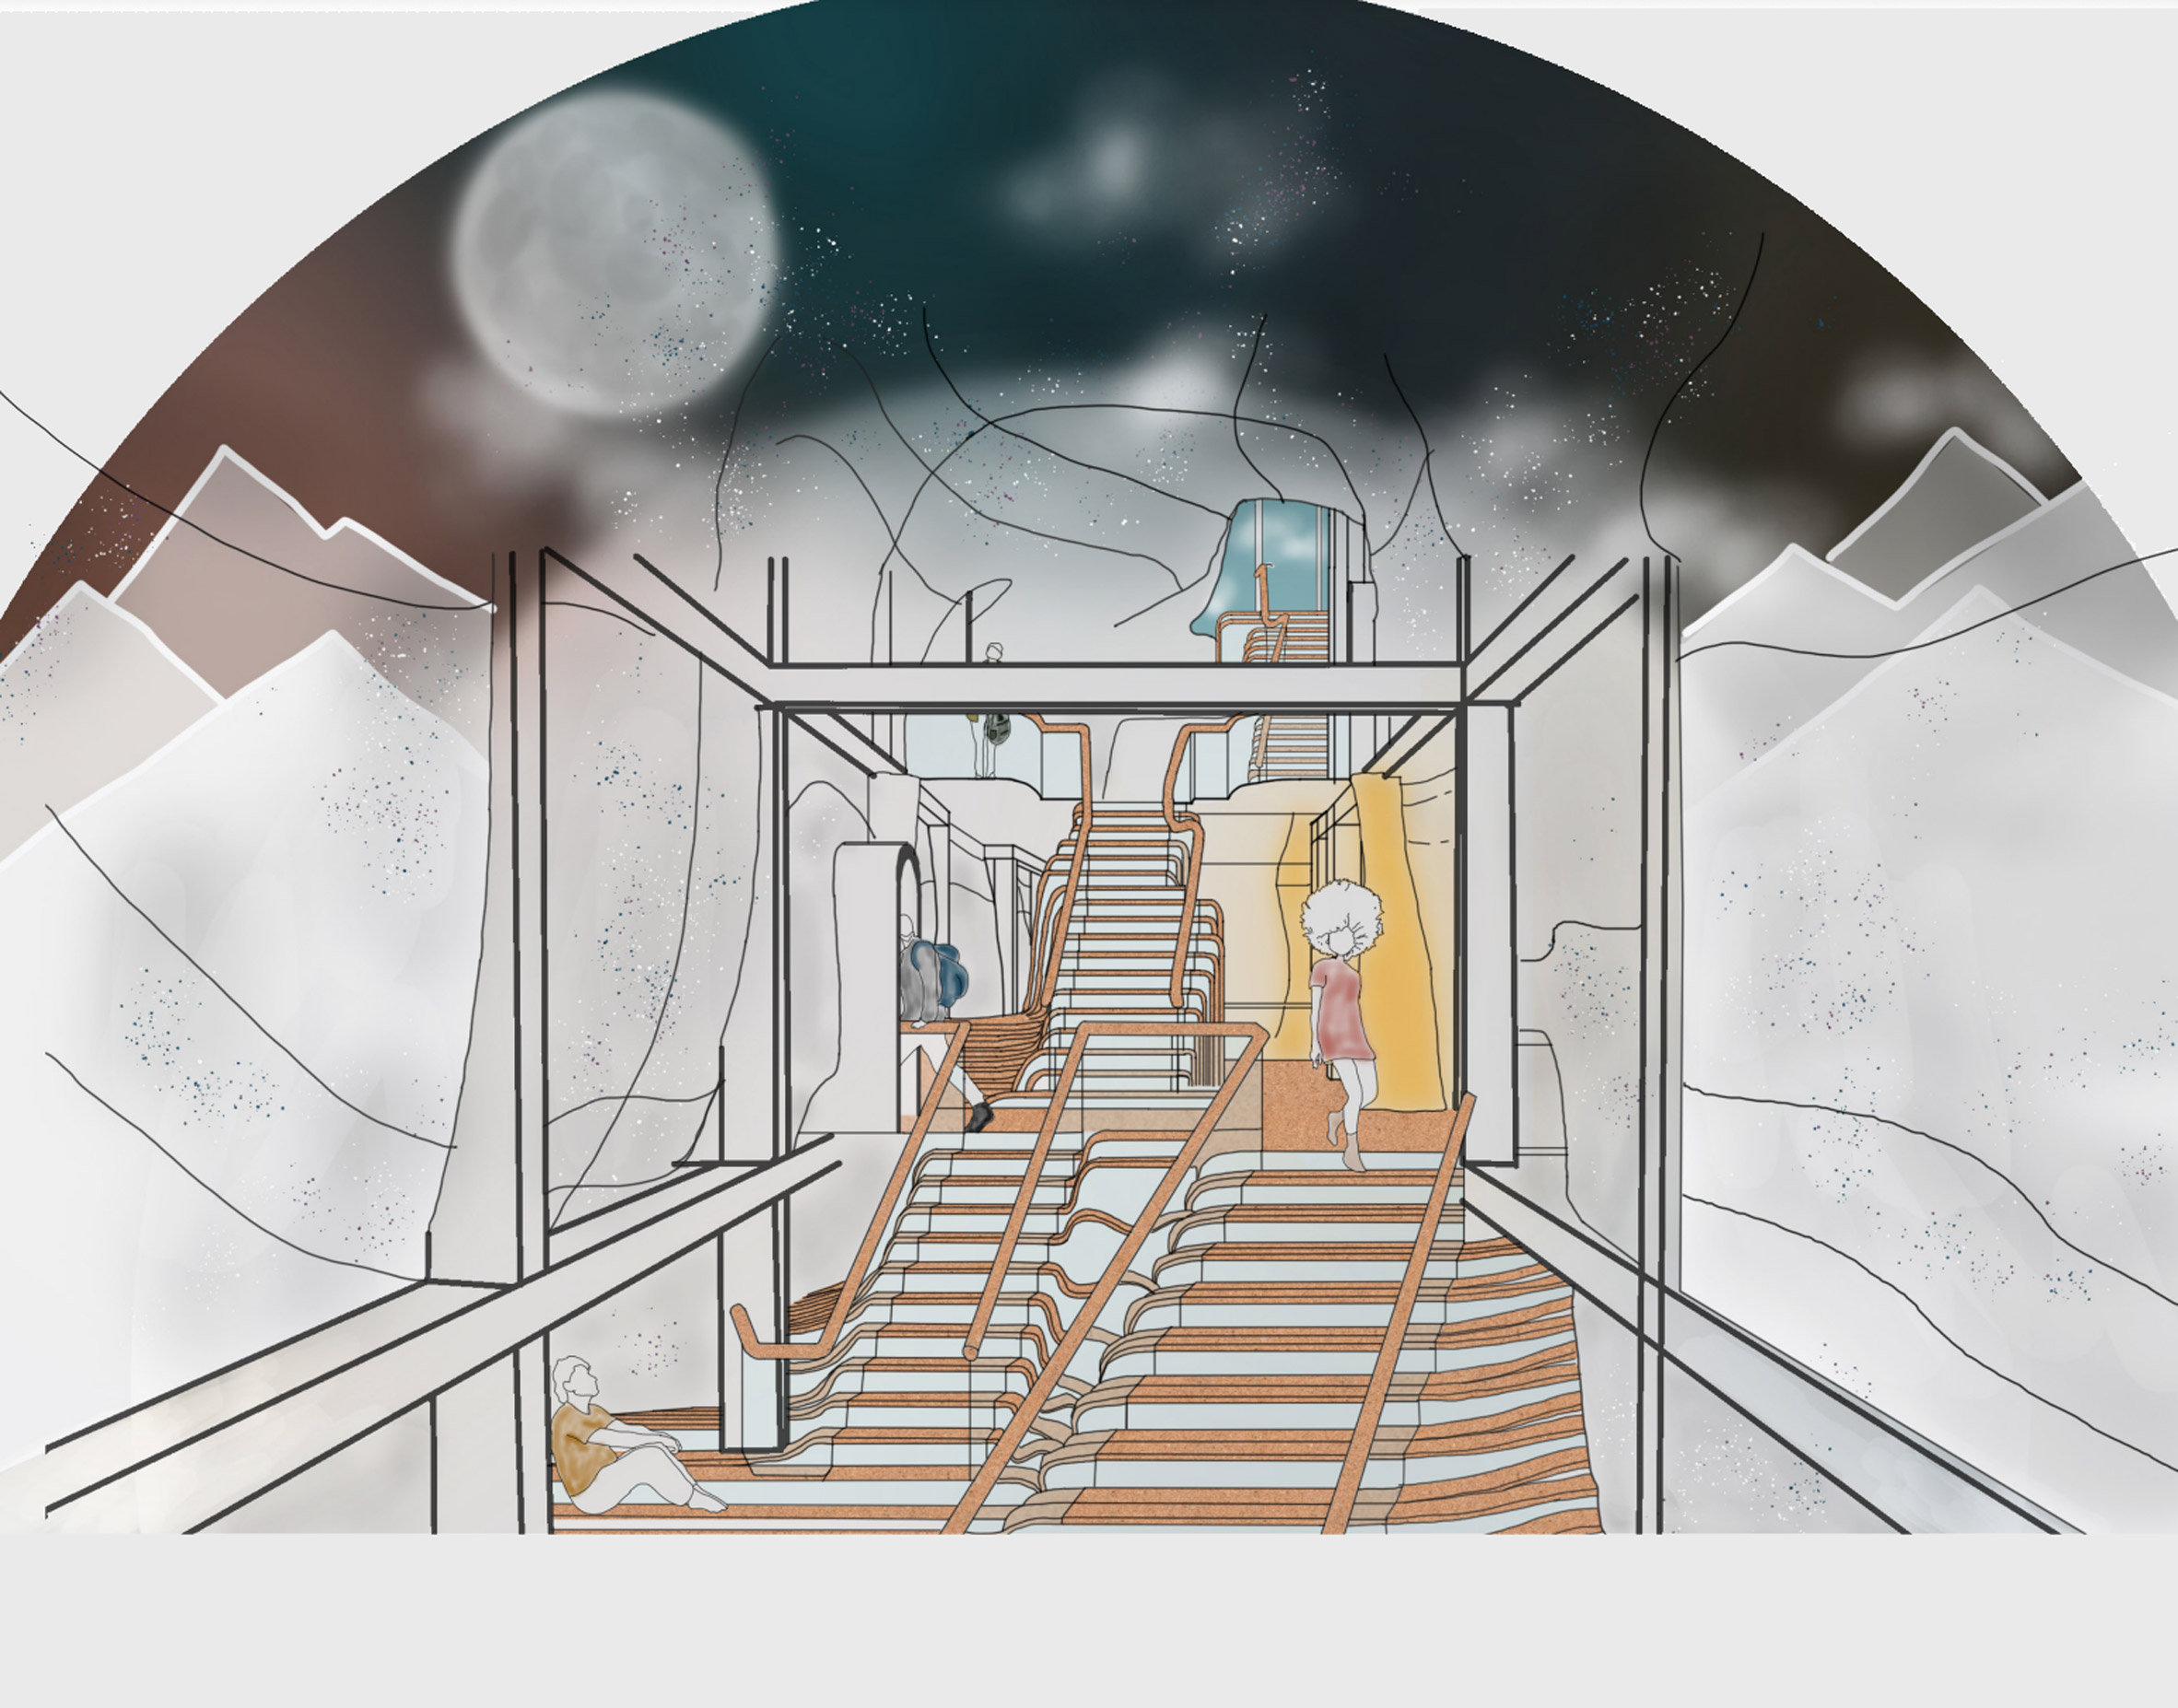 A digital illustration of an ethereal hostel for travellers, with the moon pictured in the background